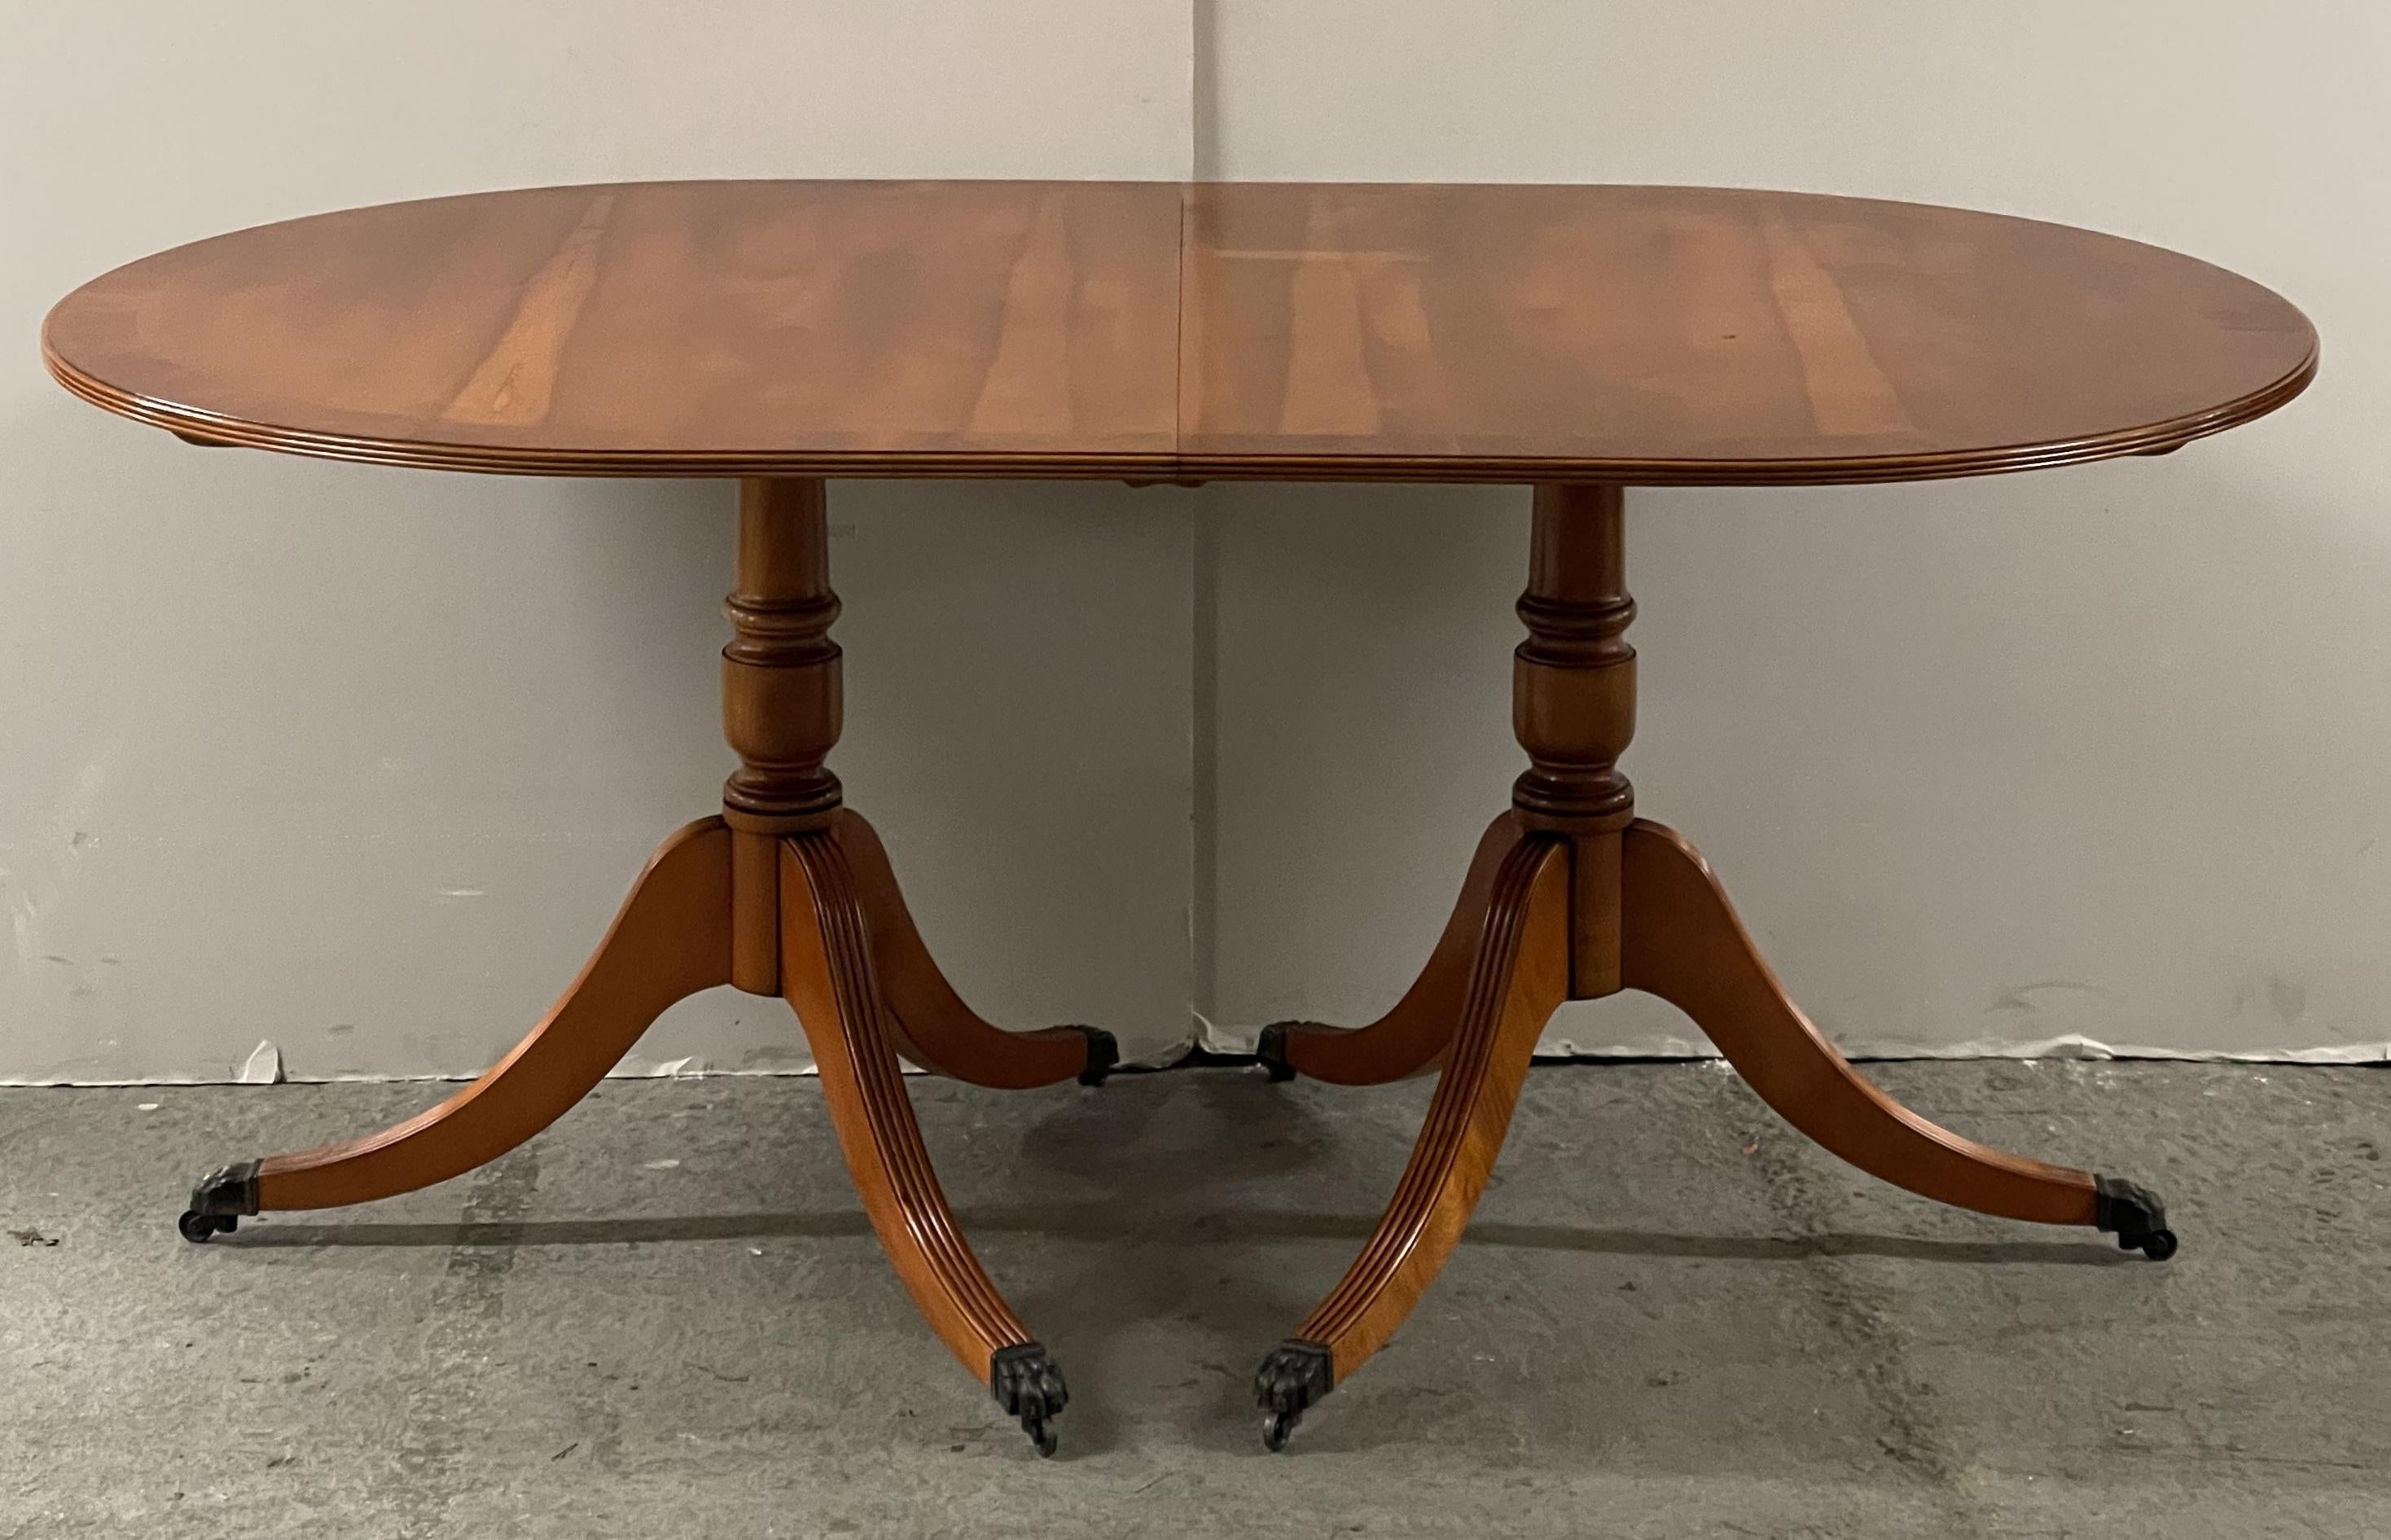 Country Vintage Yew Wood Twin Pedestal Extending Dining Table Seats 6-8 People For Sale